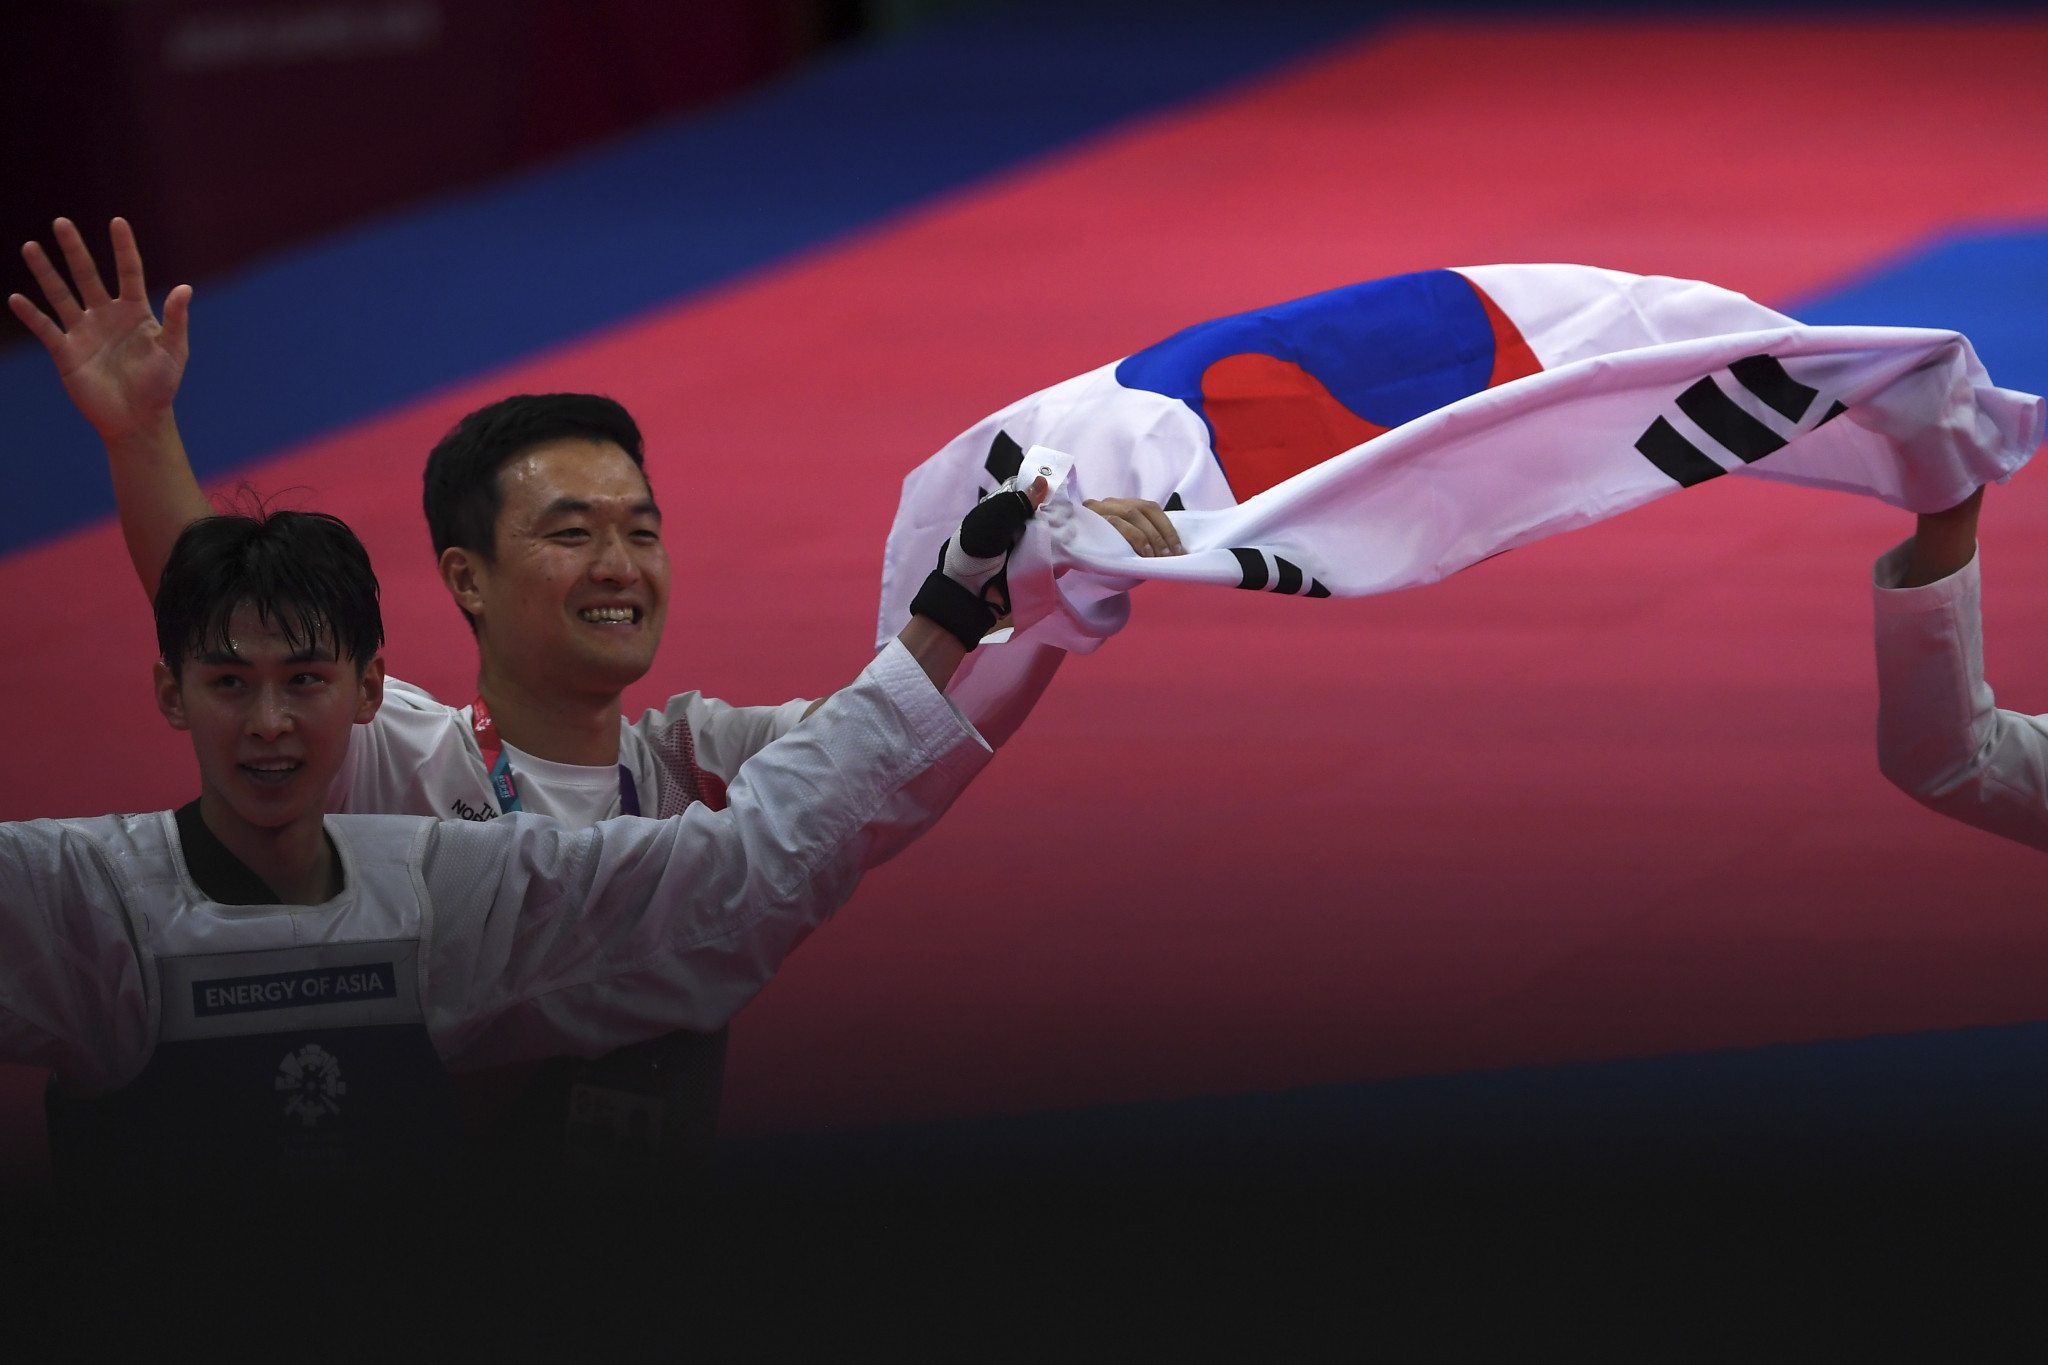 South Korea’s Kim Tae-hun claimed victory in the men’s under-58 kilograms taekwondo event today at Jakarta Palembang 2018 ©Getty Images